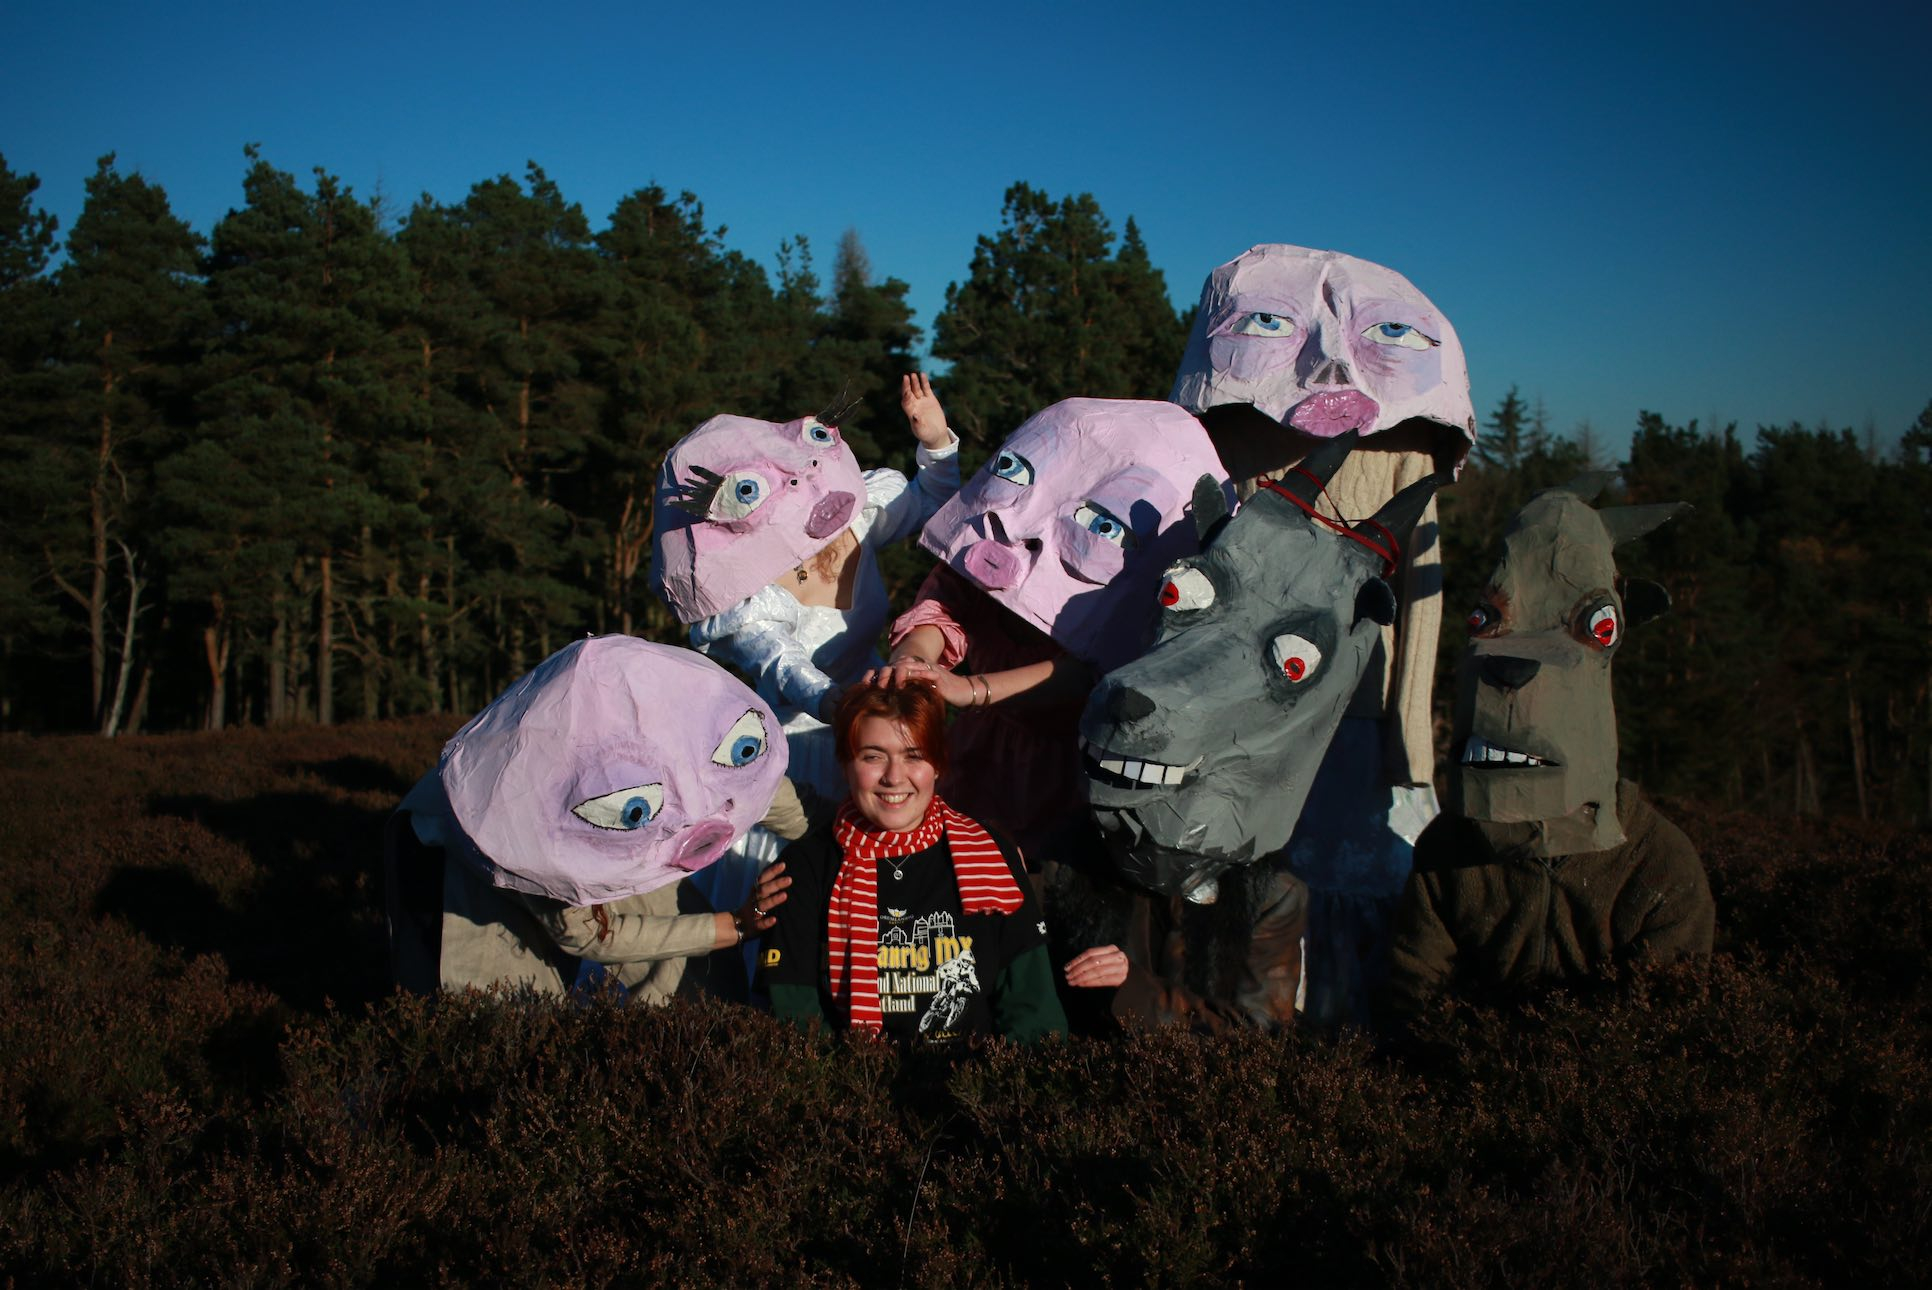 Artist surrounded by people in papier-mâché masks in a field.